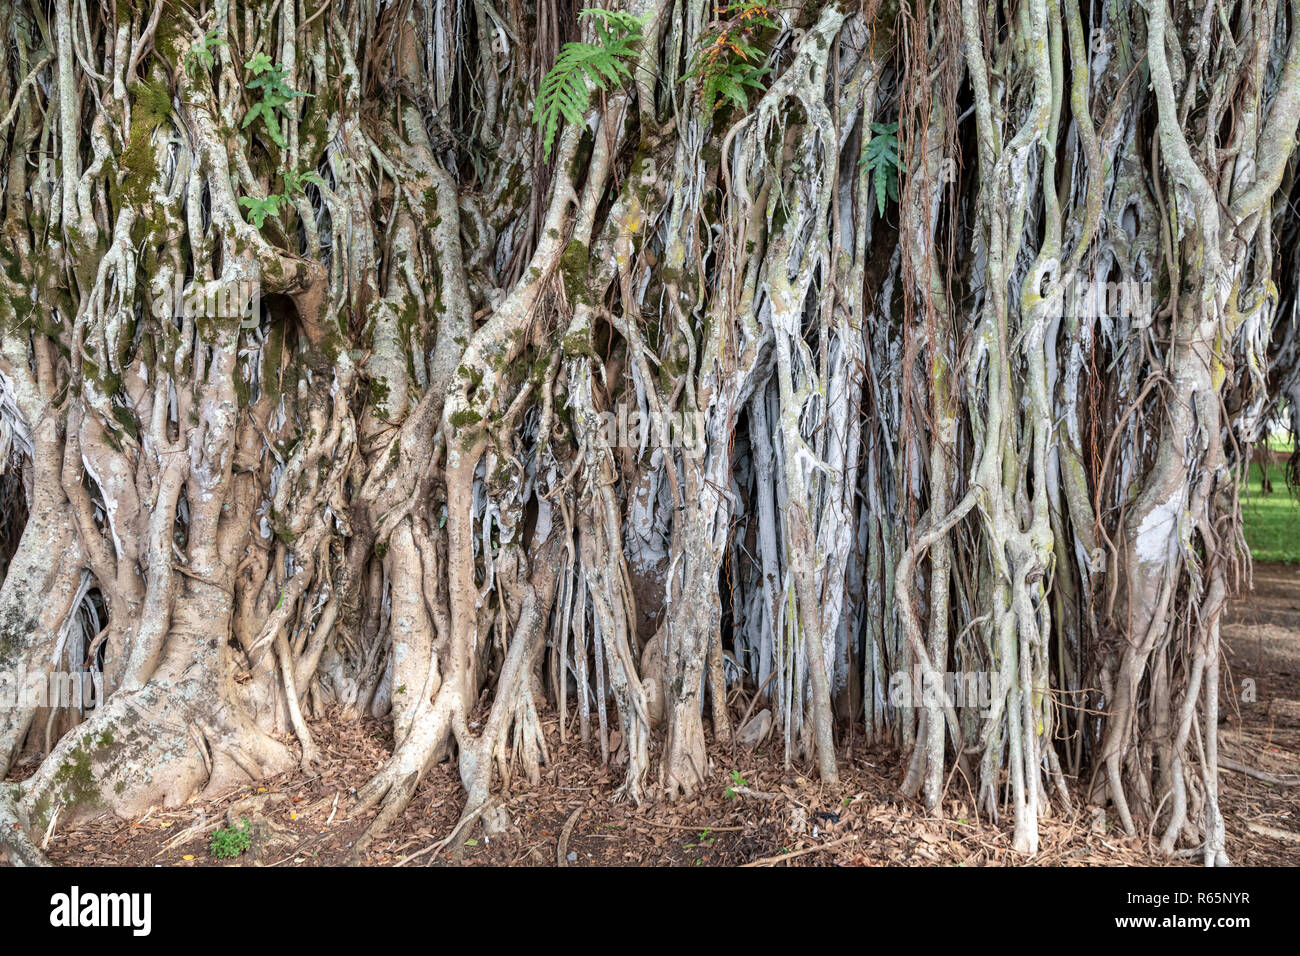 Hilo, Hawaii - Roots of a large banyan tree in downtown Hilo. Stock Photo